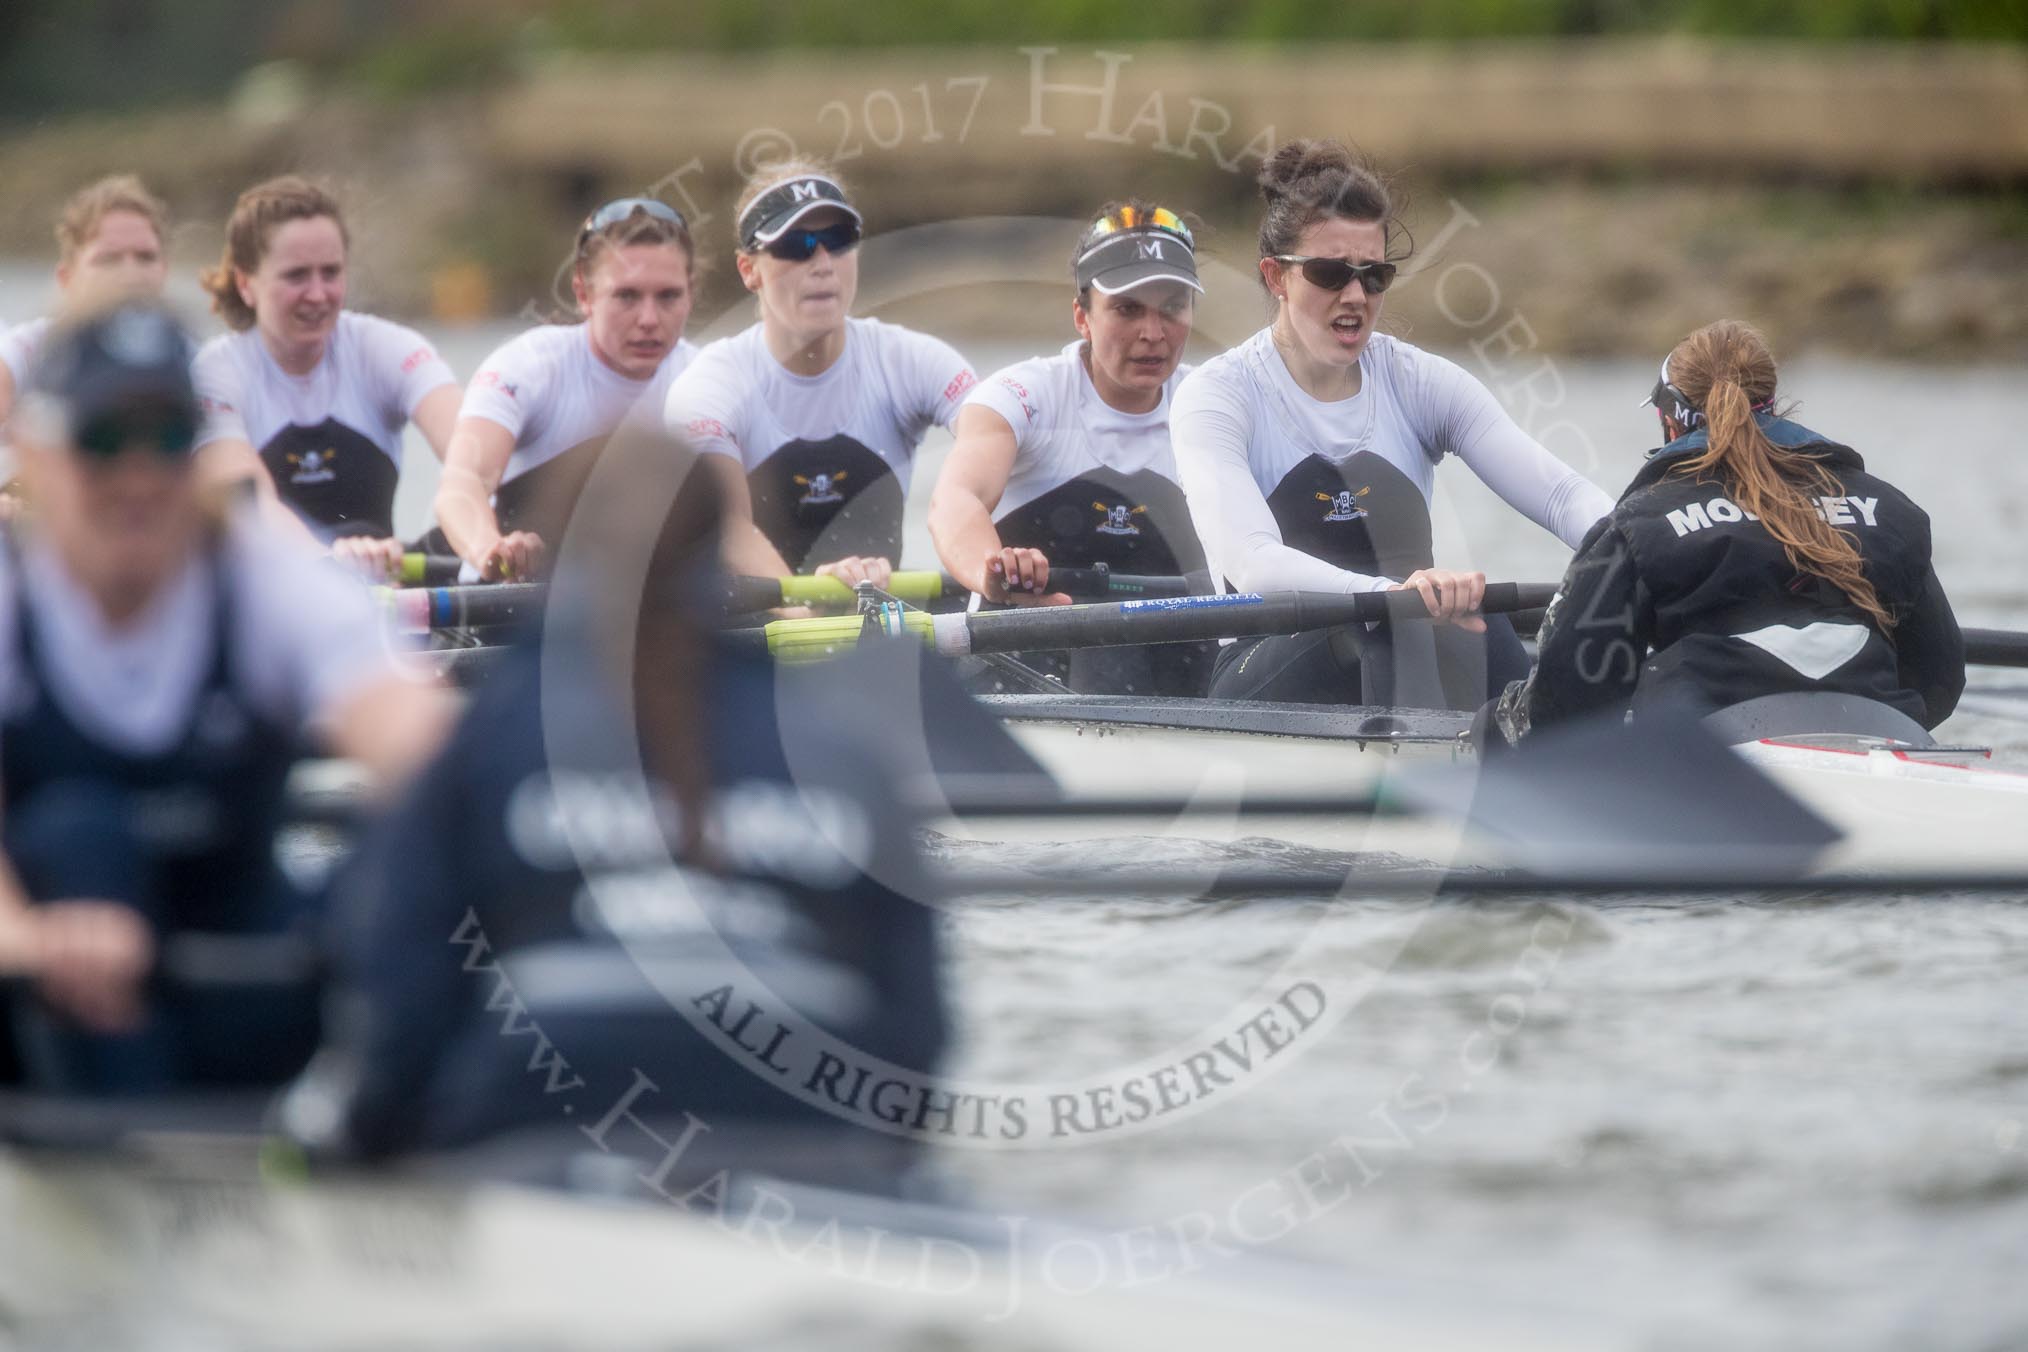 The Cancer Research UK Boat Race season 2017 - Women's Boat Race Fixture OUWBC vs Molesey BC: Molesey still in the lead close to the finish line - 3 Lucy Primmer, 4 Claire McKeown, 5 Katie Bartlett, 6 Elo Luik, 7 Gabriella Rodriguez, stroke Ruth Whyman, cox Anna Corderoy.
River Thames between Putney Bridge and Mortlake,
London SW15,

United Kingdom,
on 19 March 2017 at 16:25, image #156